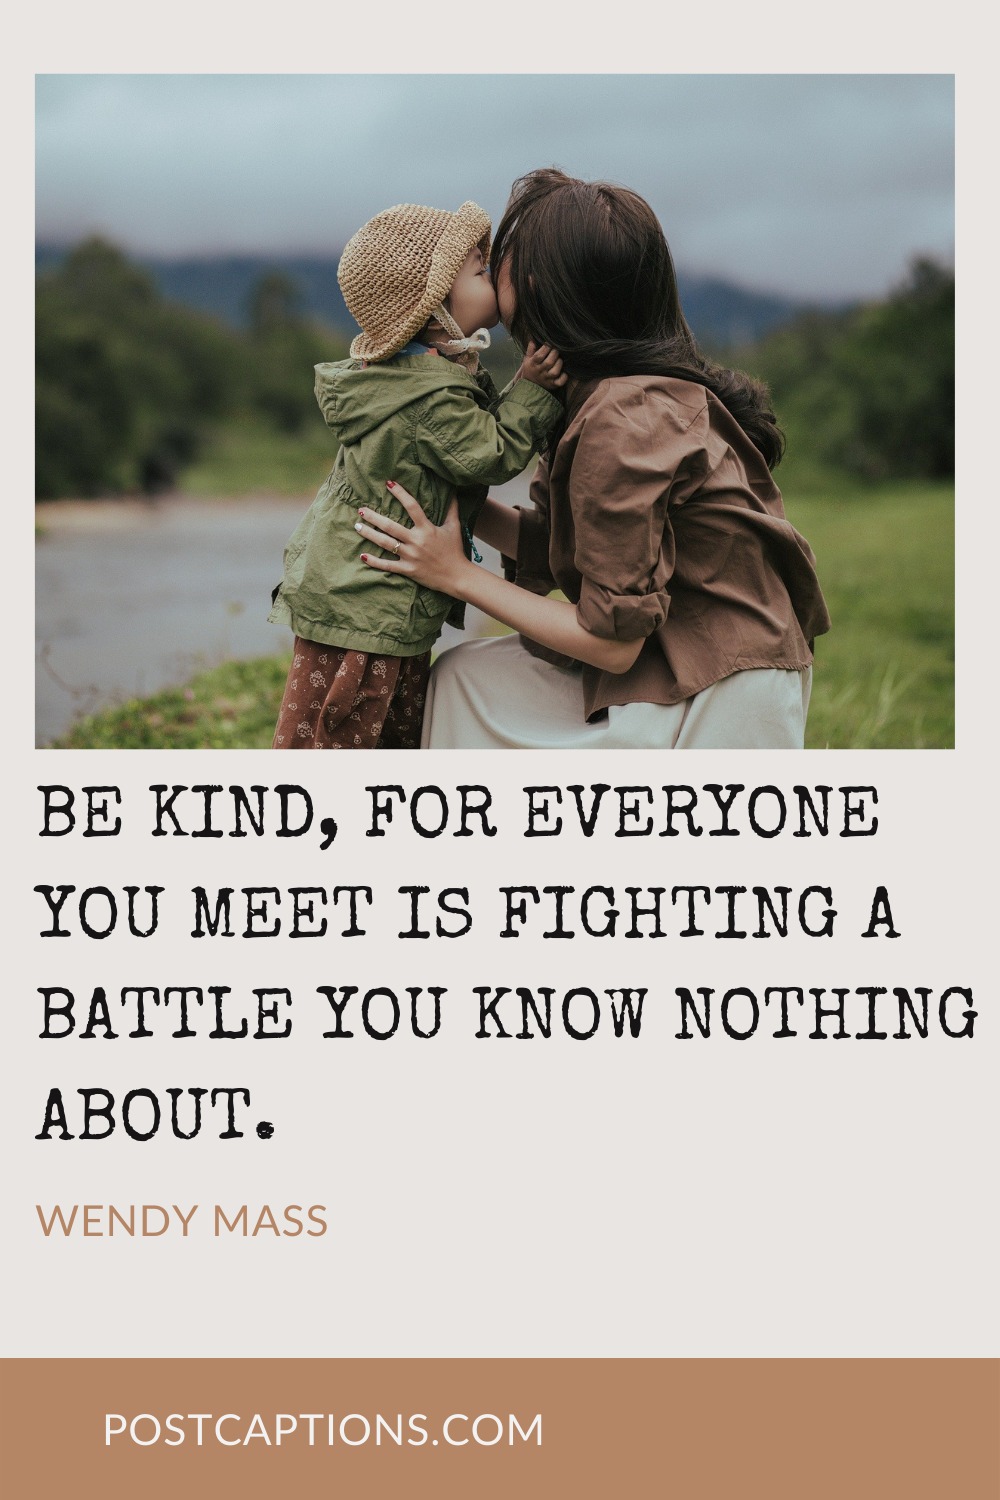 Kindness Quotes for Instagram